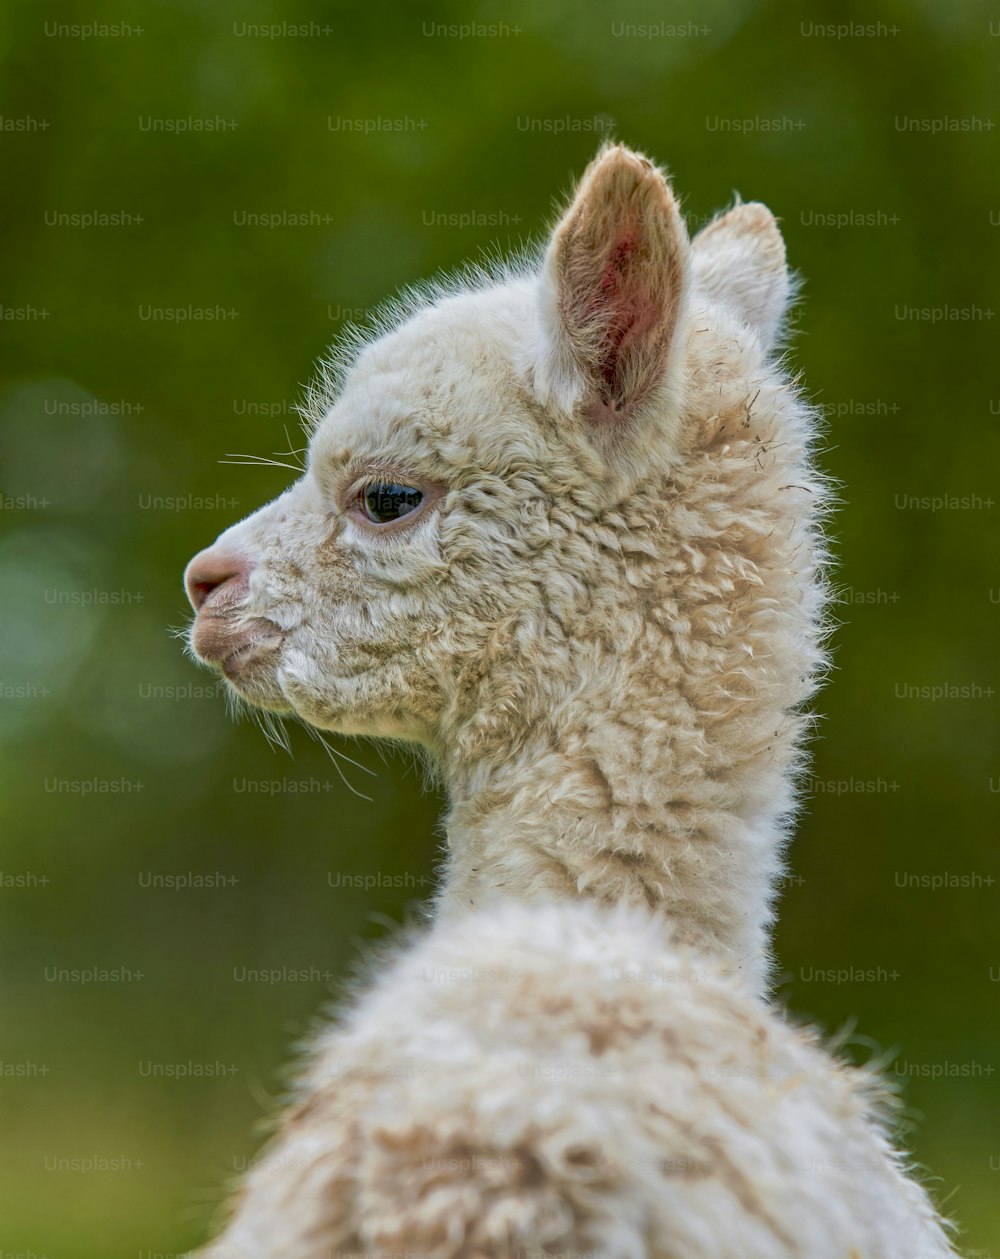 a close up of a baby alpaca with a blurry background